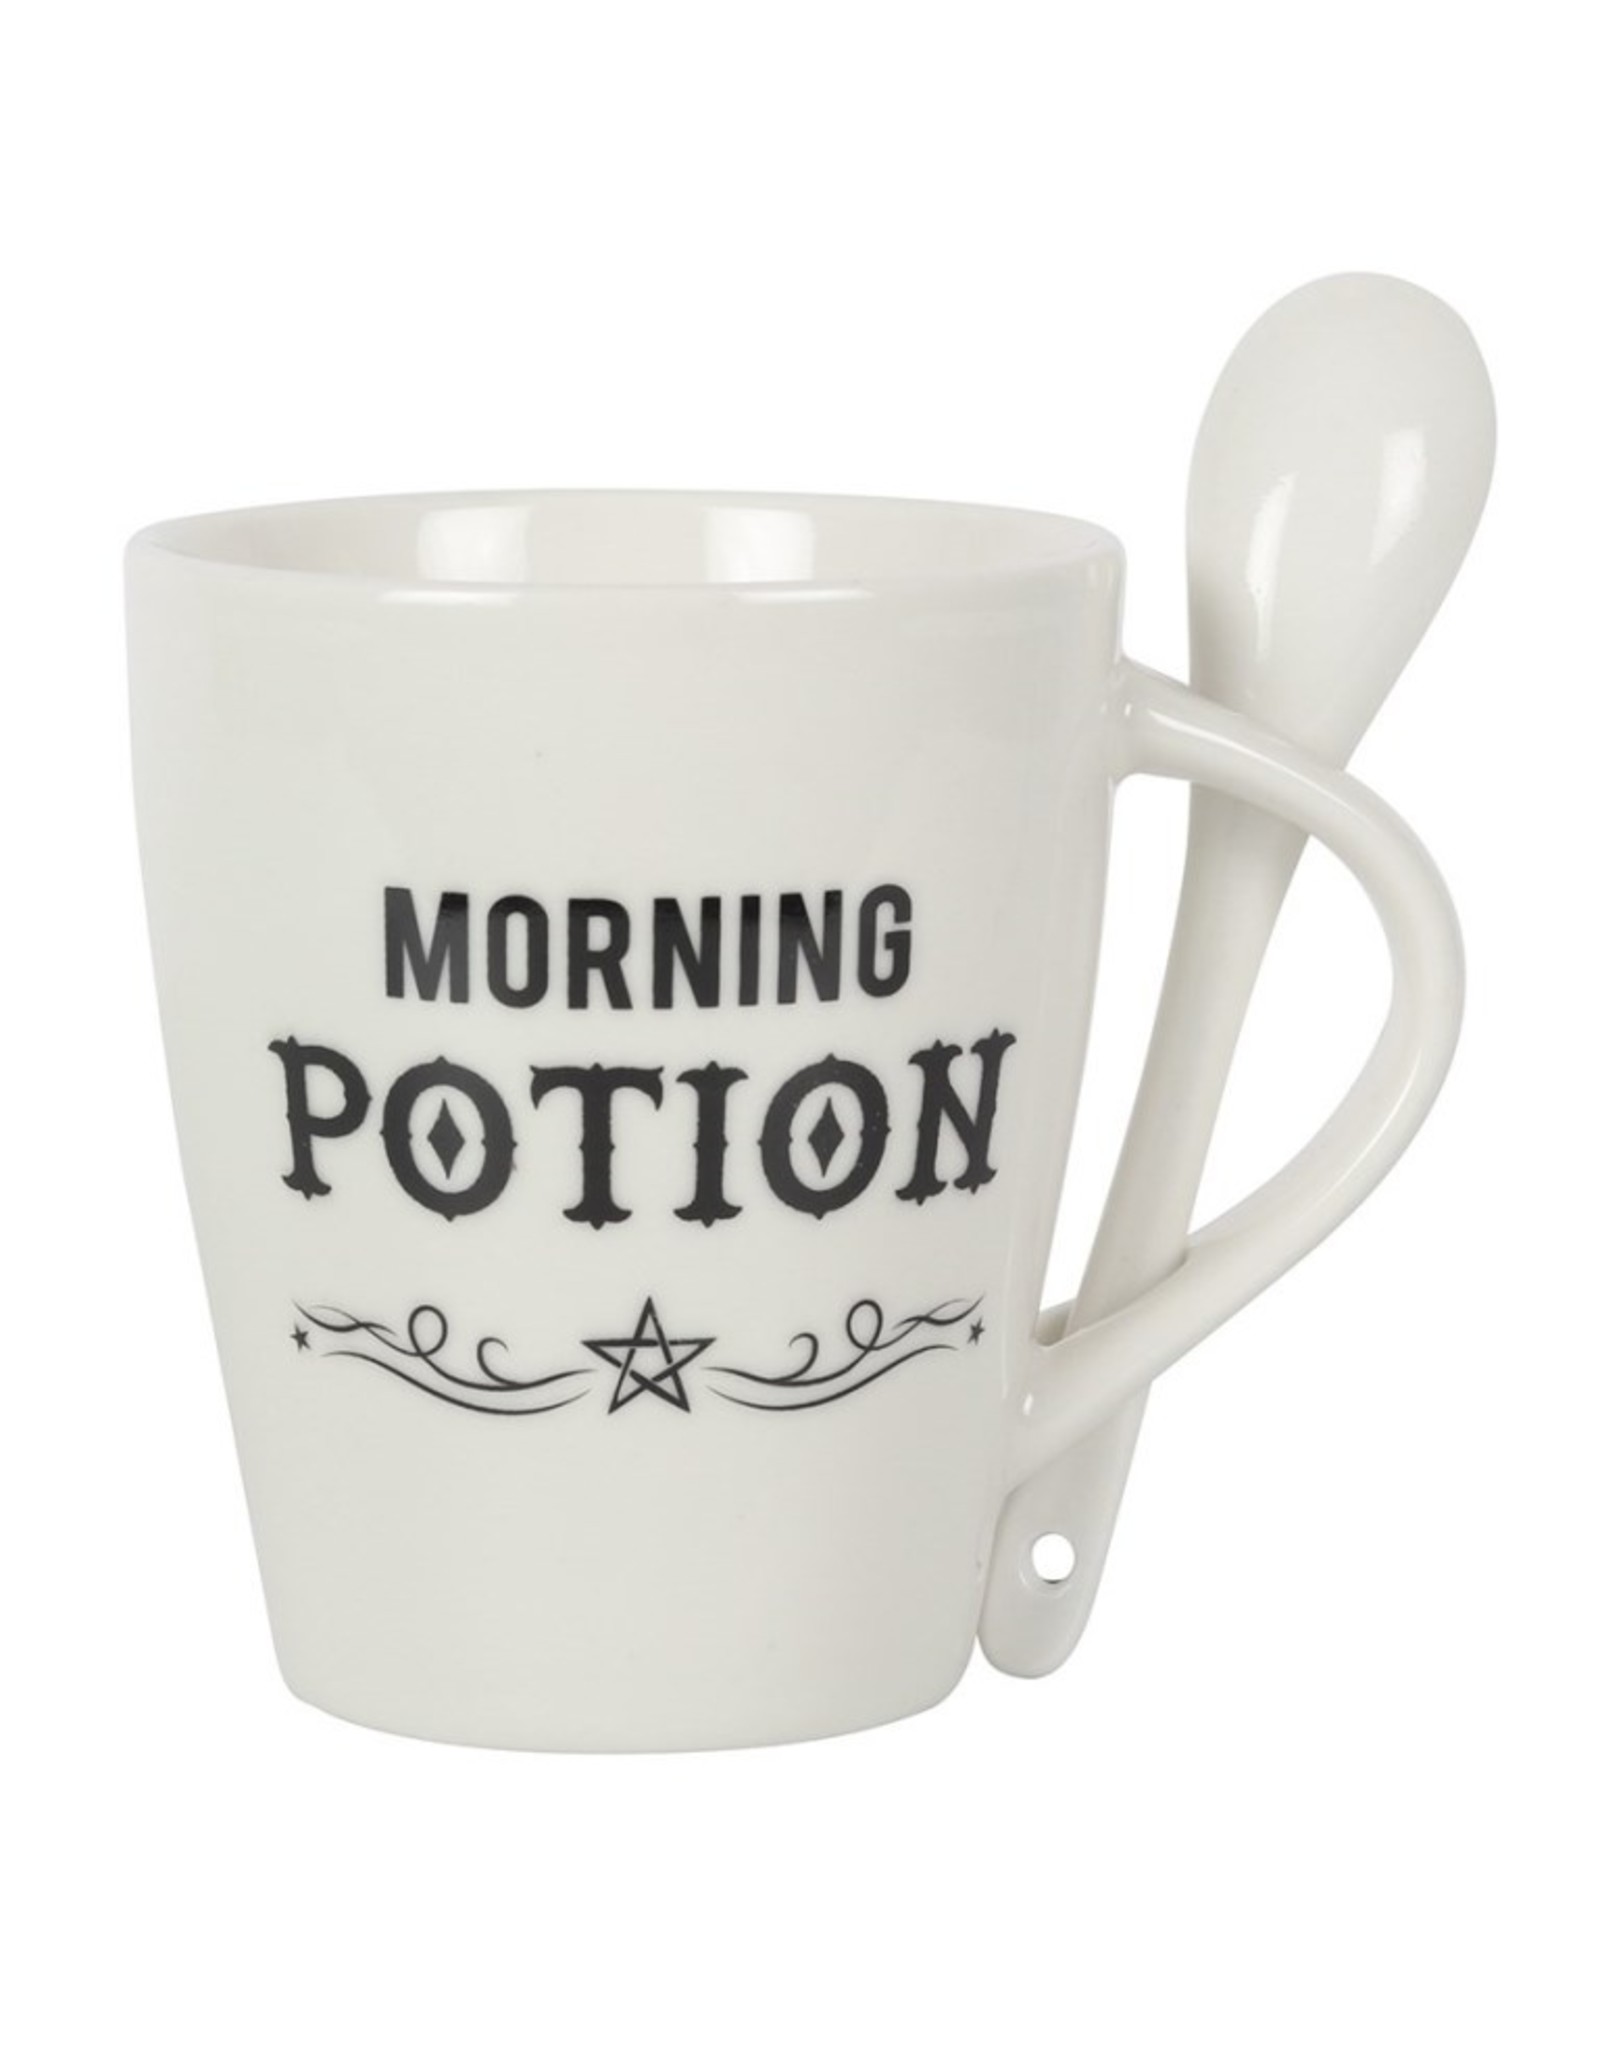 Something Different Giftware & Lifestyle - Morning Potion Mug and Spoon set